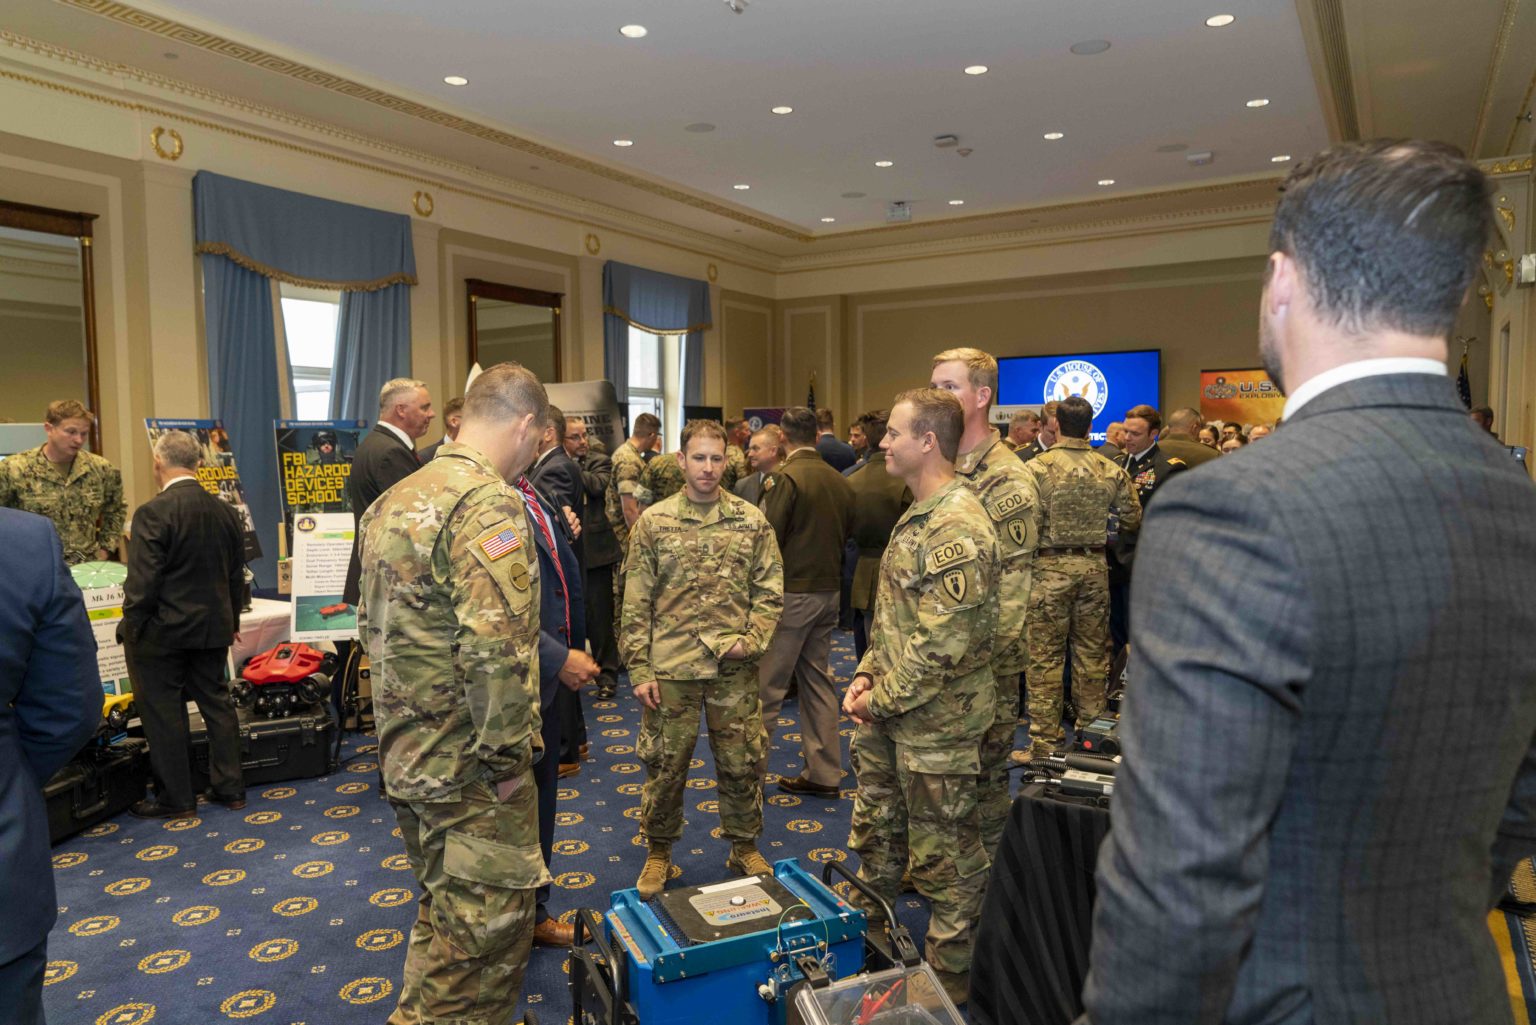 EOD Day on the Hill United States Bomb Technician Association